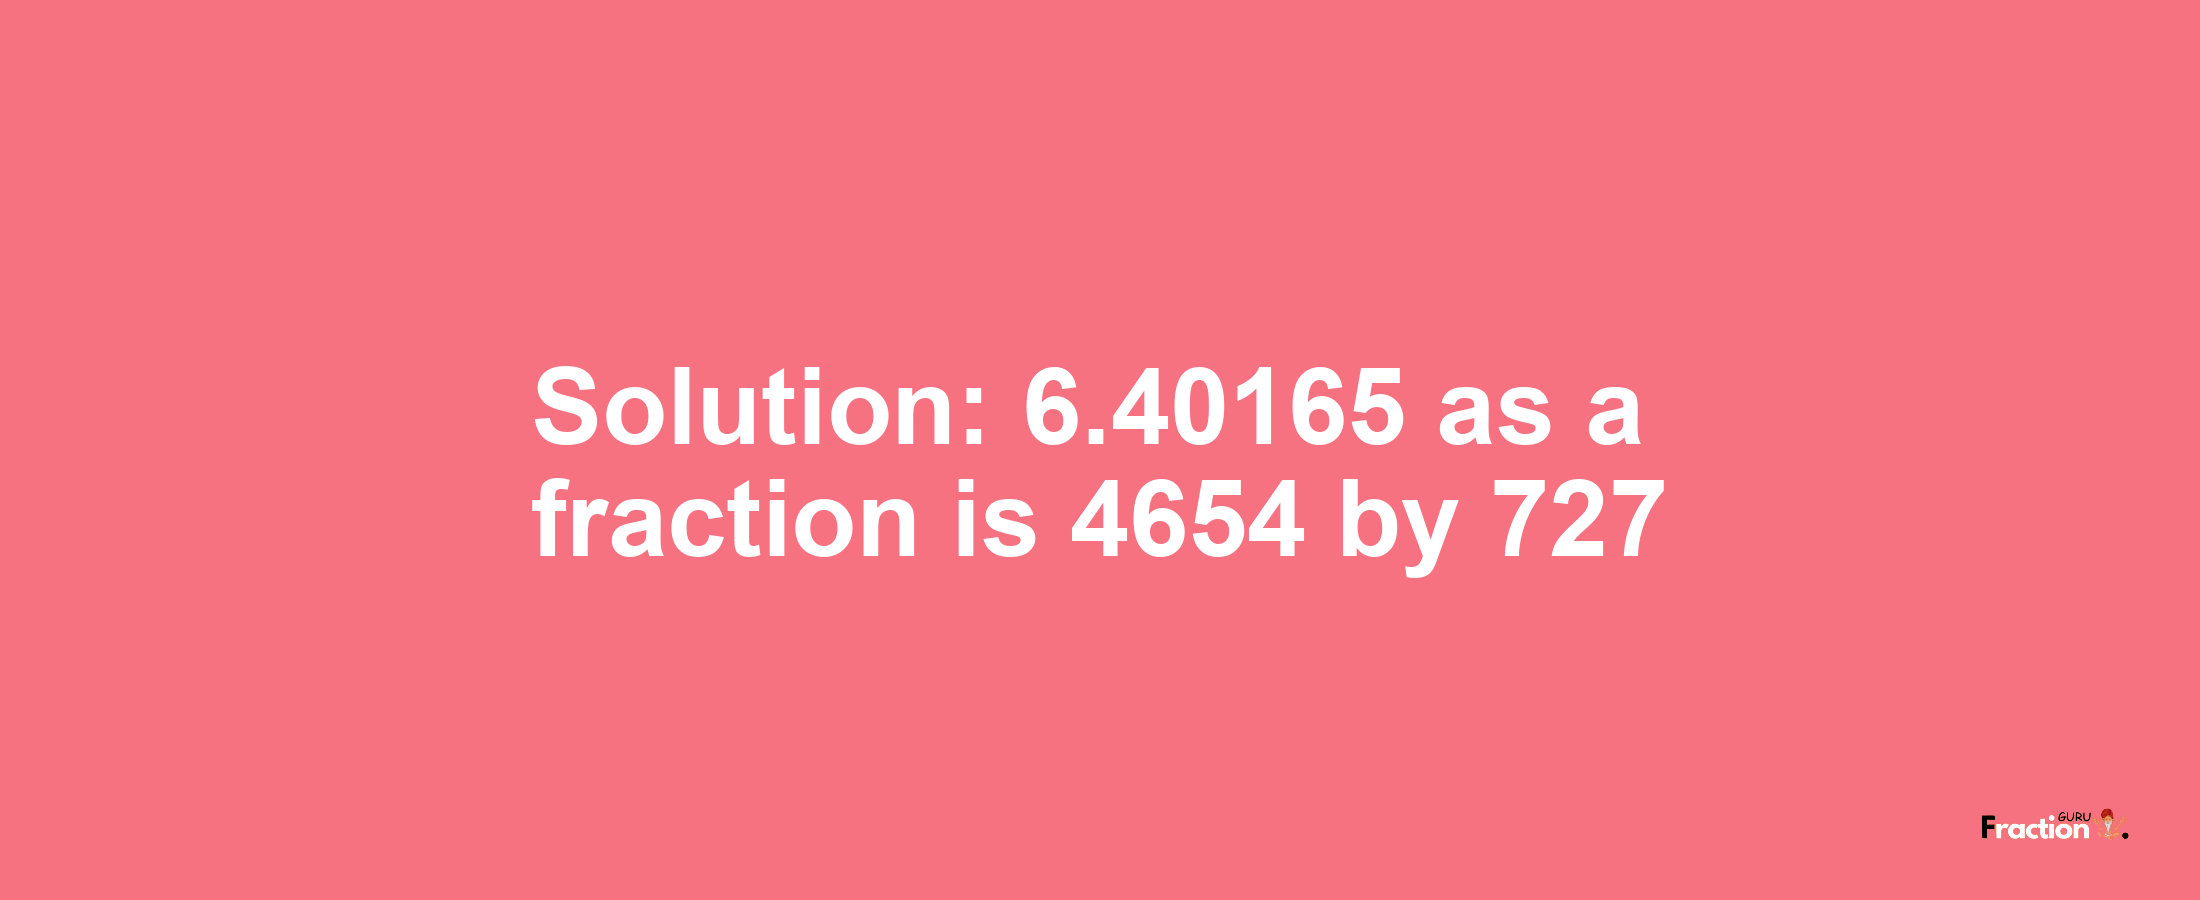 Solution:6.40165 as a fraction is 4654/727